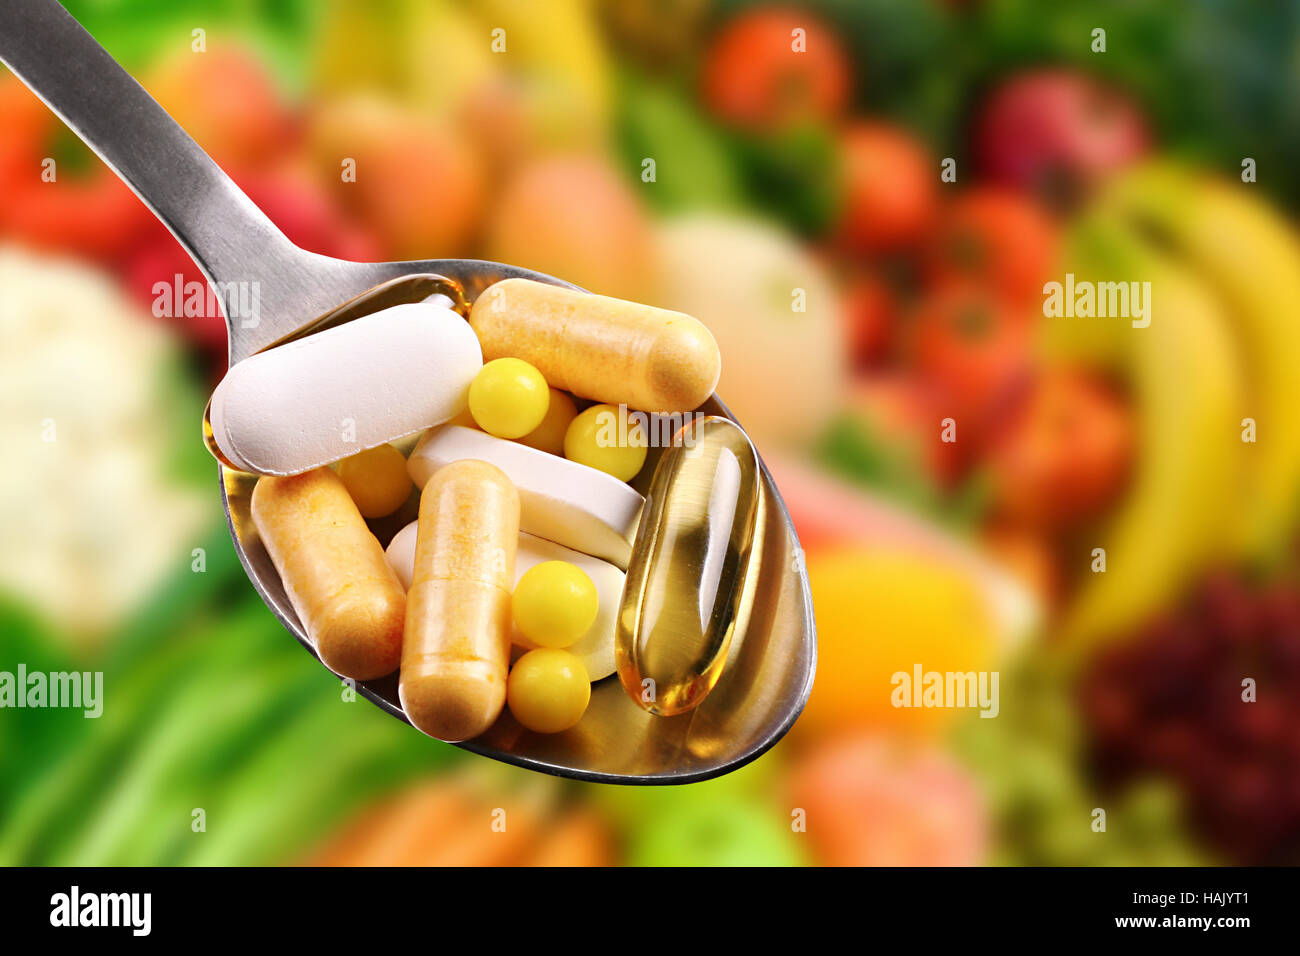 spoon with dietary supplements on fruits background Stock Photo